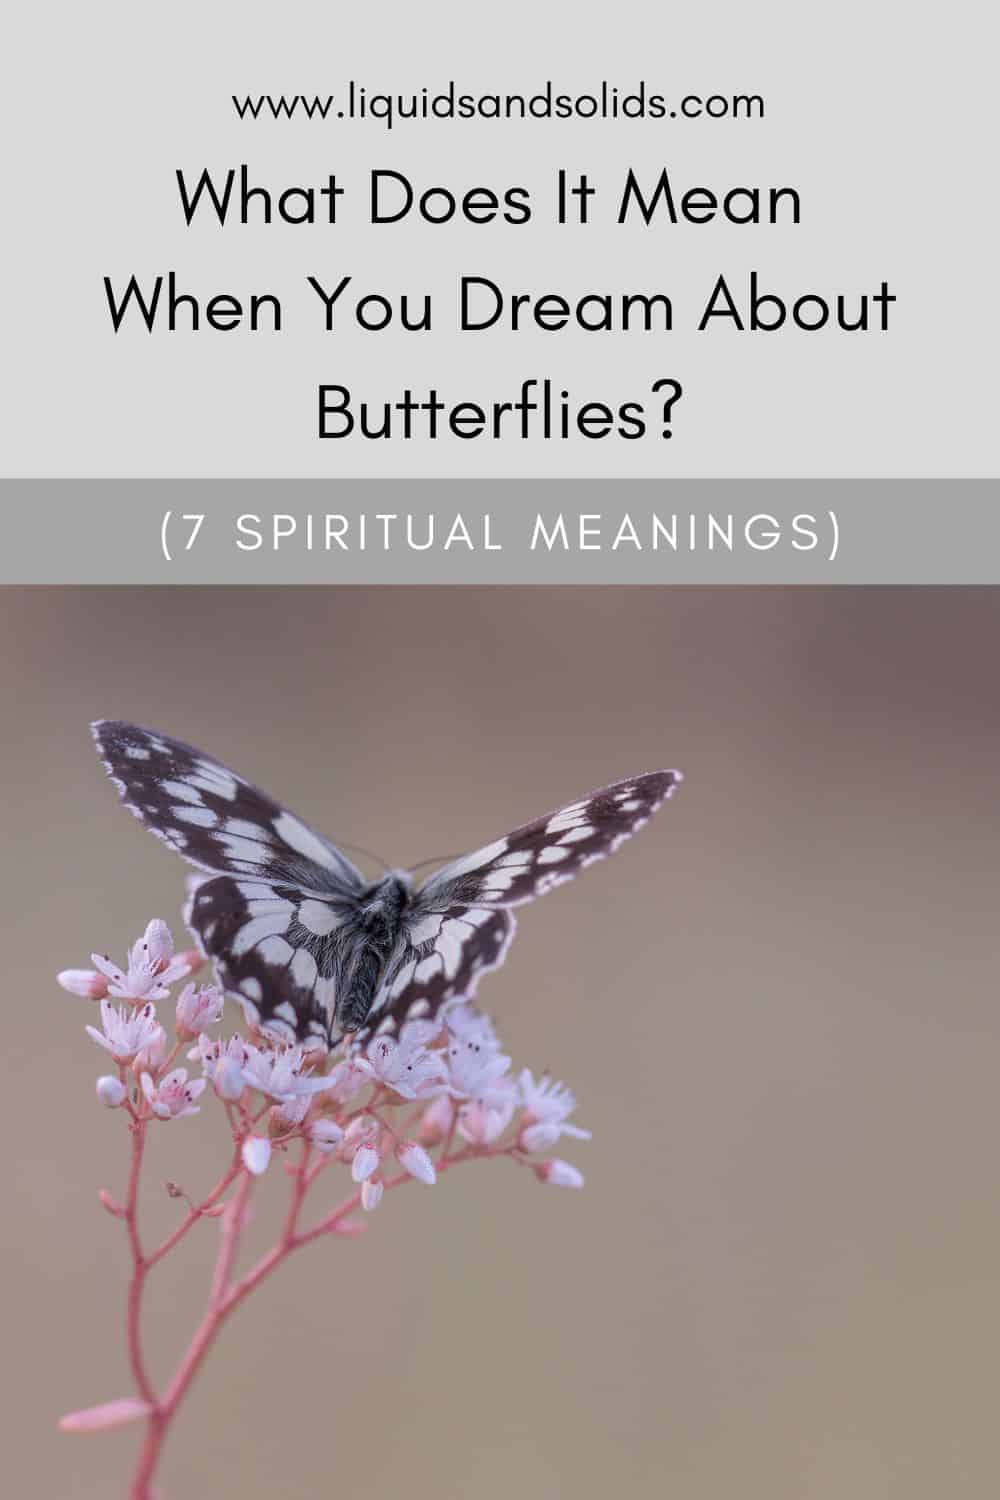 What Does It Mean When You Dream About Butterflies? (7 Spiritual Meanings)